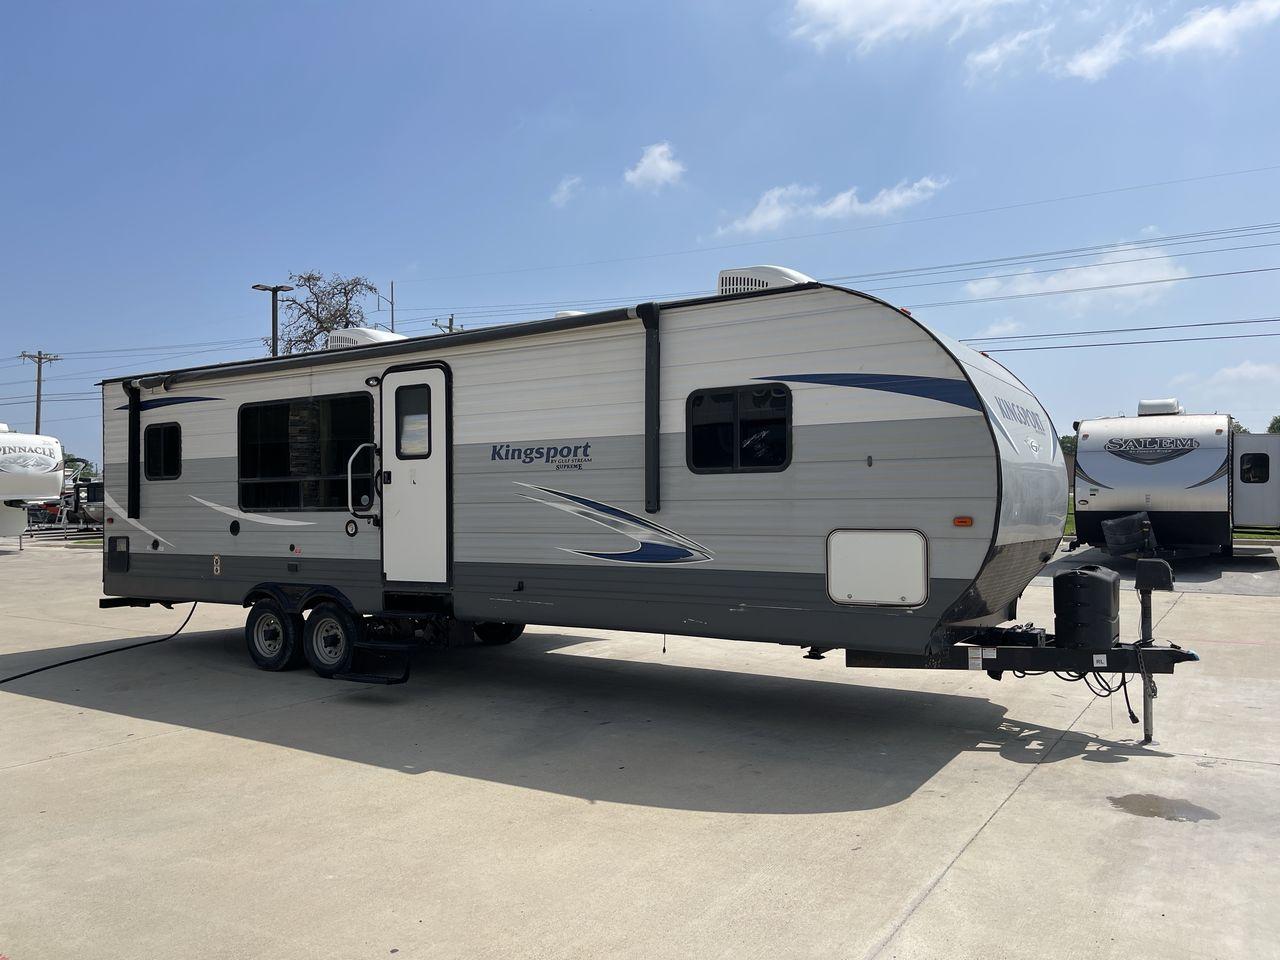 2019 GRAY GULF STREAM KINGSPORT 295SBW - (1NL1G3524K1) , Length: 34.5 ft | Dry Weight: 6,778 lbs | Slides: 1 transmission, located at 4319 N Main Street, Cleburne, TX, 76033, (817) 221-0660, 32.435829, -97.384178 - The 2019 Gulf Stream Kingsport 295SBW combines comfort and functionality in a well-designed package. This travel trailer is ready to meet your demands on the road. The Gulf Stream Kingsport 295SBW is 34.5 feet long and has a dry weight of 6,778 pounds, striking a compromise between size and maneuver - Photo #22